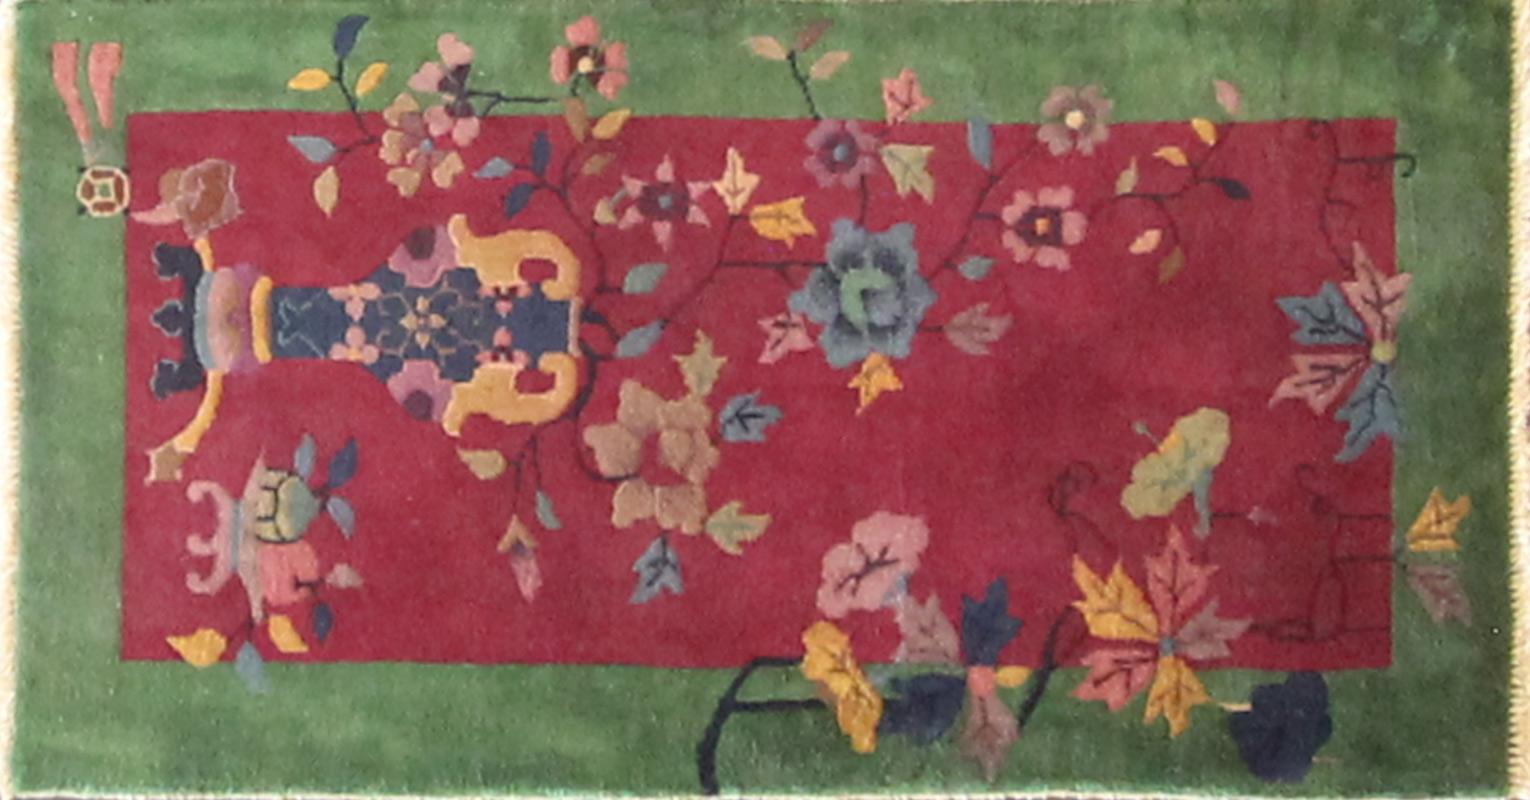 Antique Art Deco Chinese Rug, Chinese Art, 2' x 4', c-1920's
It's hard not noticing this rug, the beauty of the green and red colors background  and traditional floral and vase design in multi color. it's condition is excellent . The ends and sides